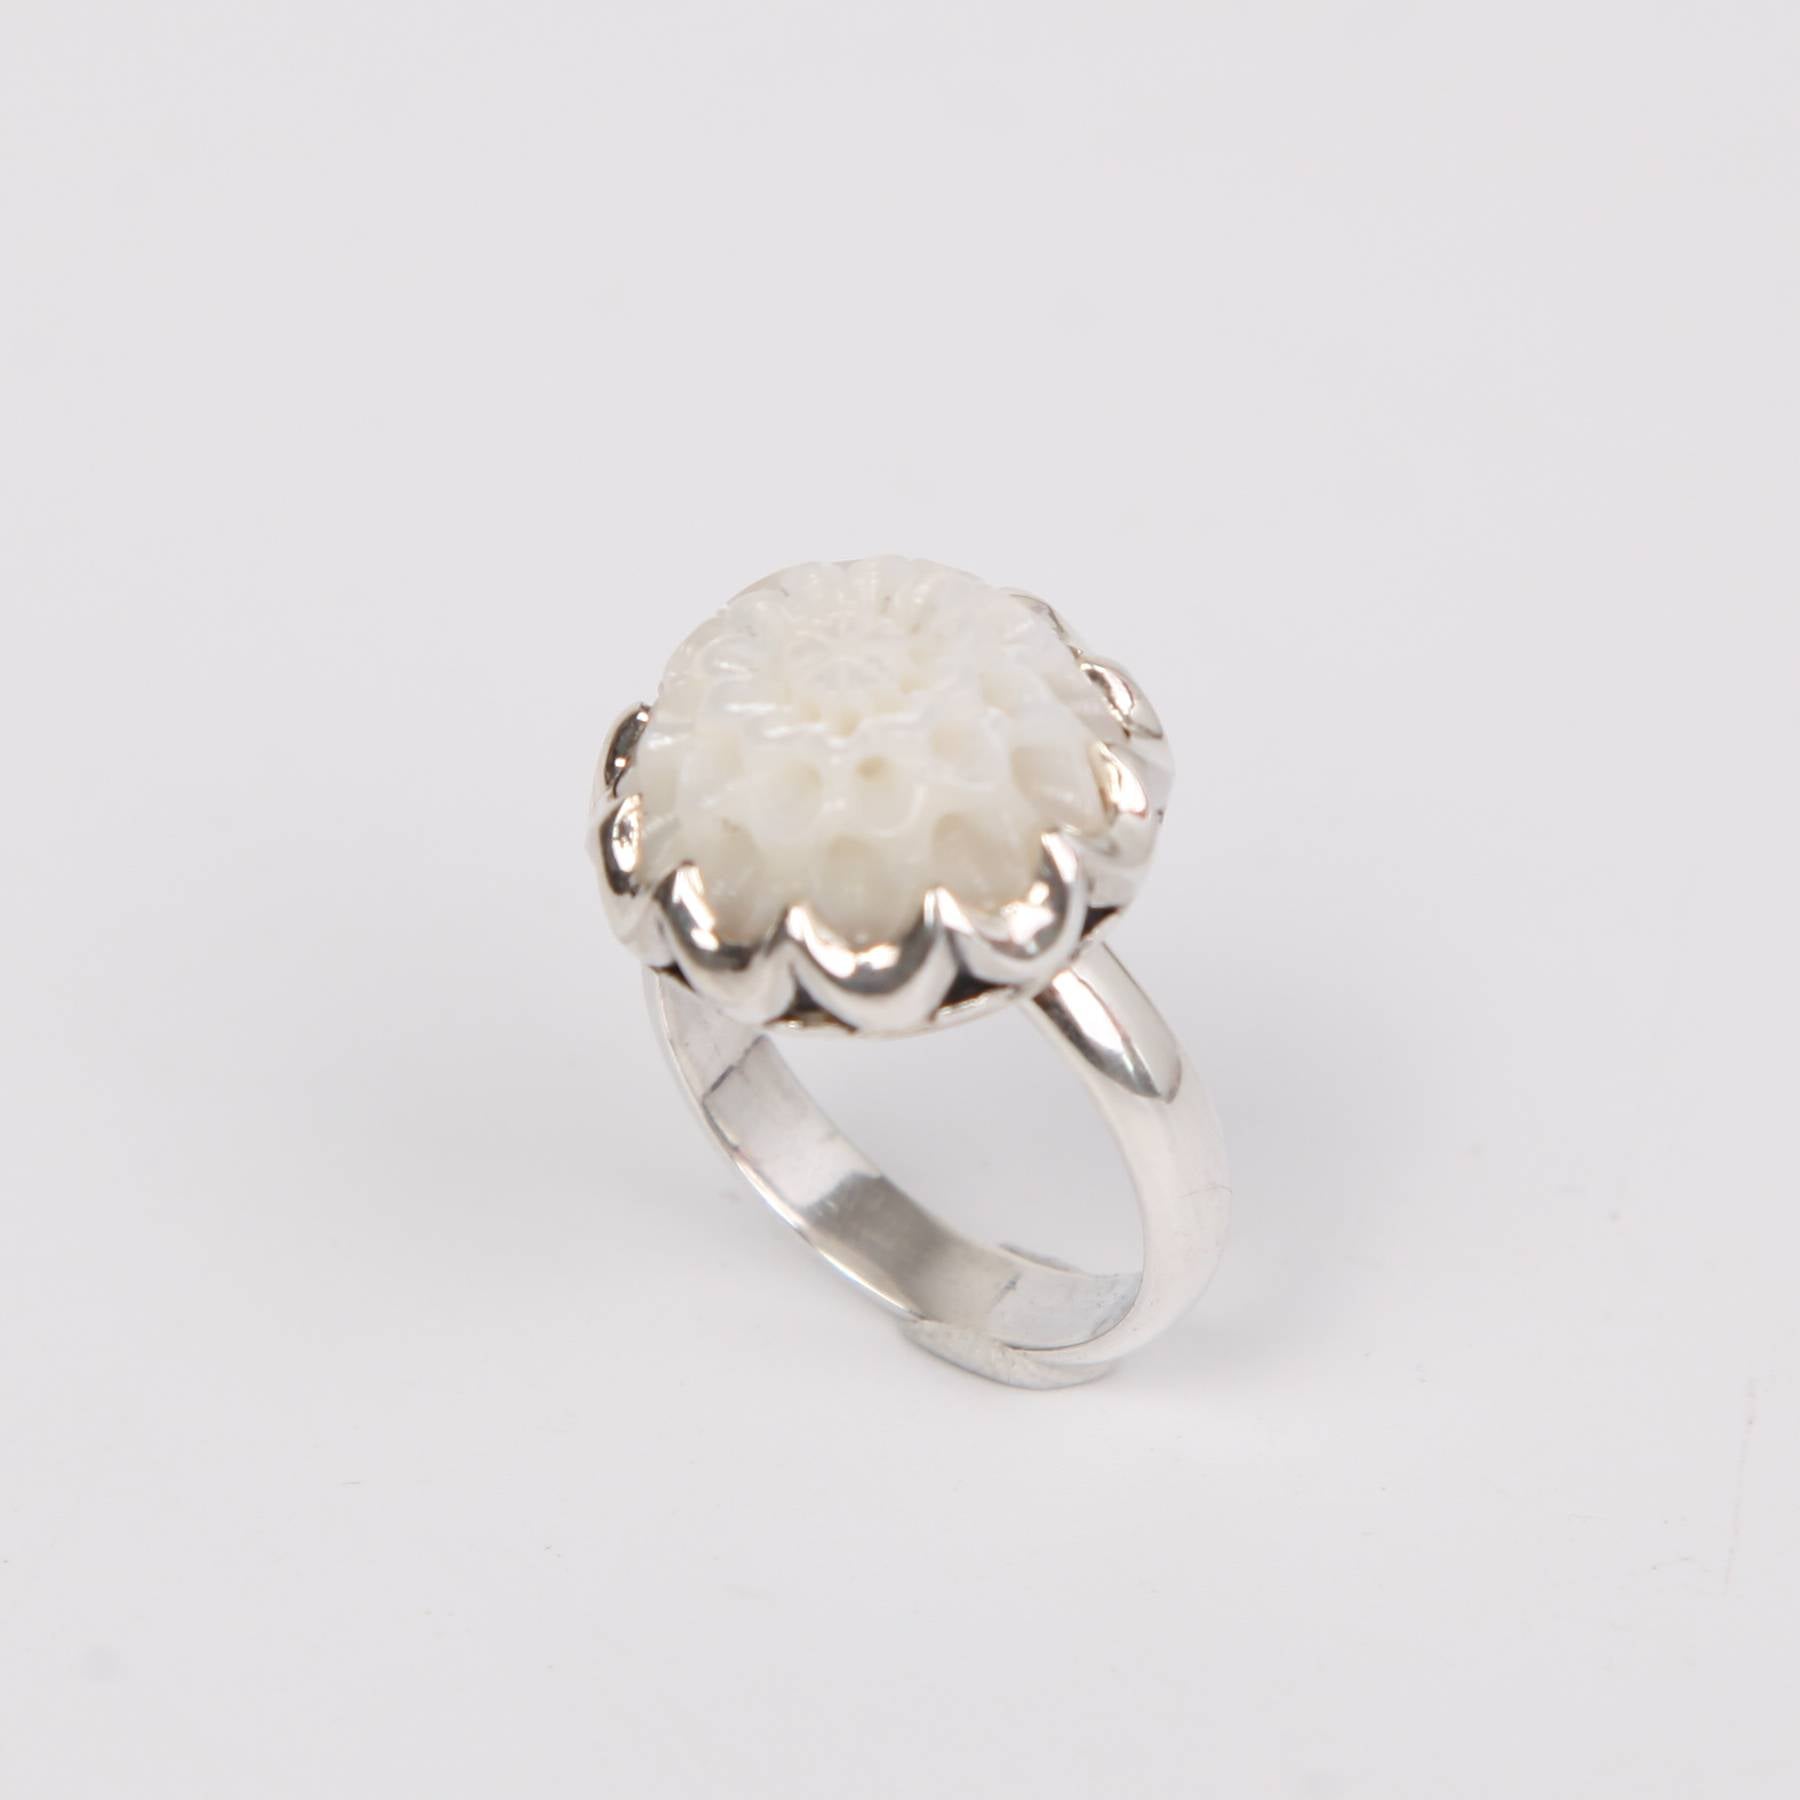 Floral Sterling Silver Ring with Mother of Pearl